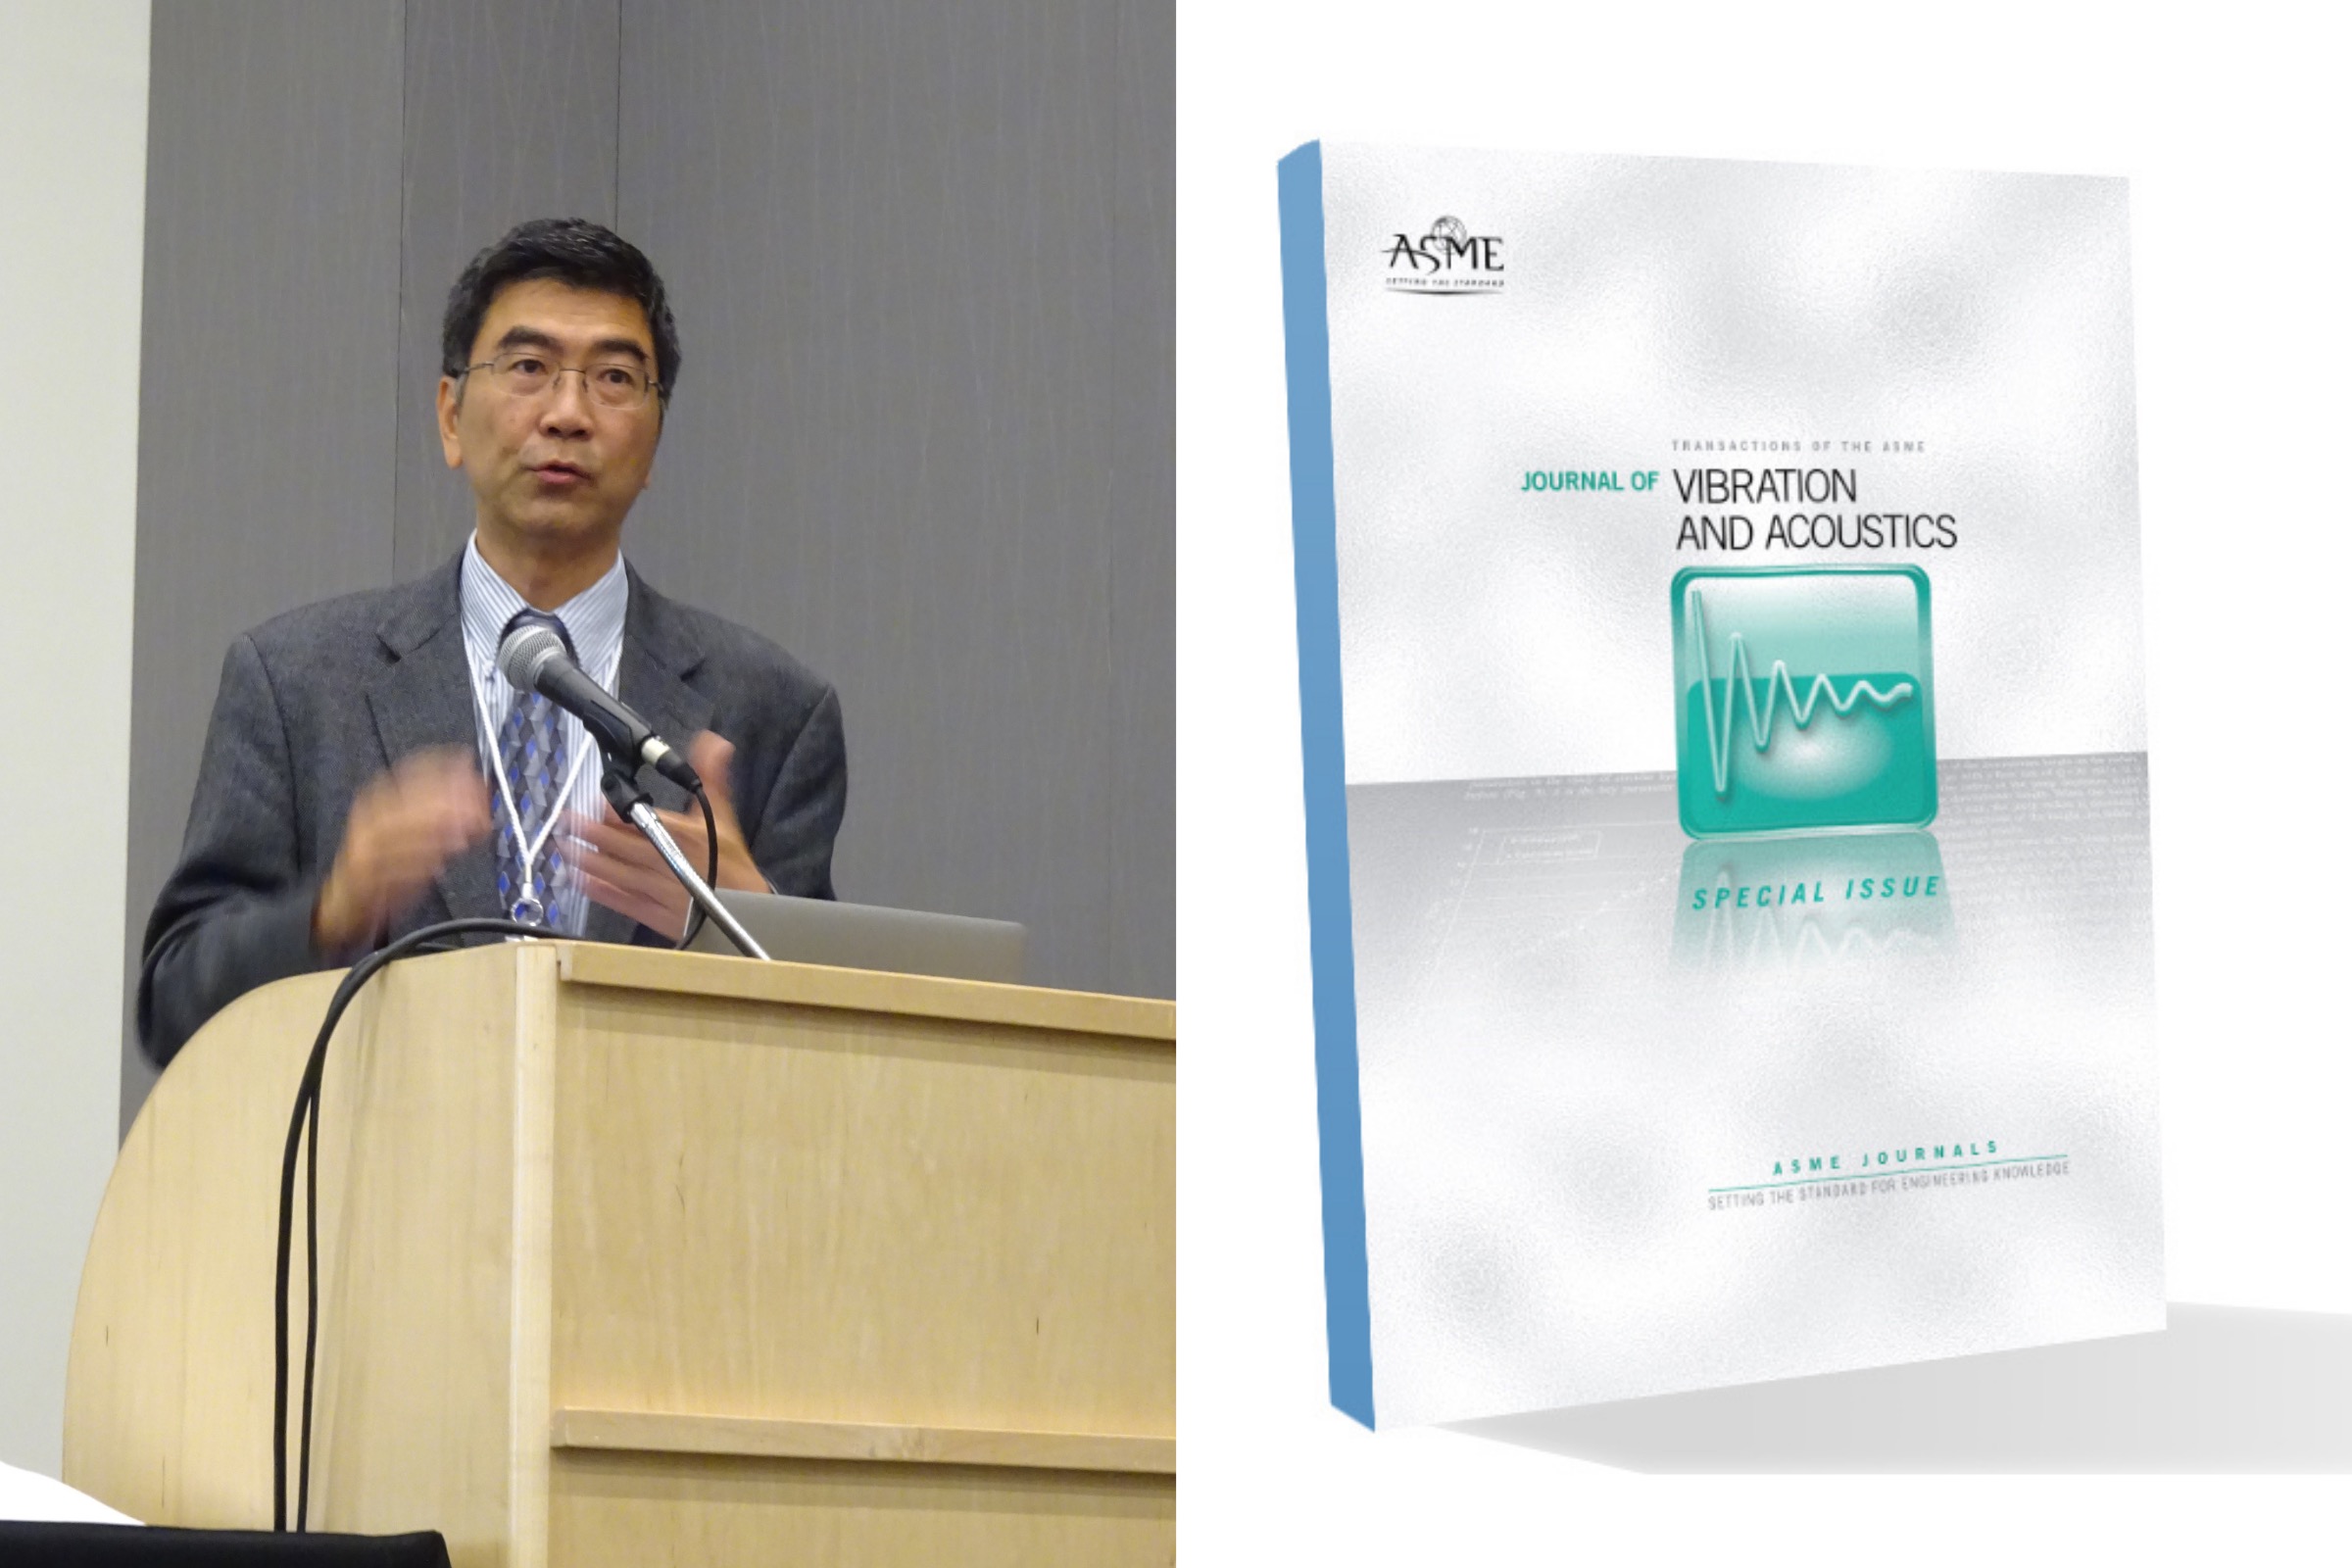 Steve Shen at a podium on left and the cover of the Journal of Vibrations and Acoustics on right